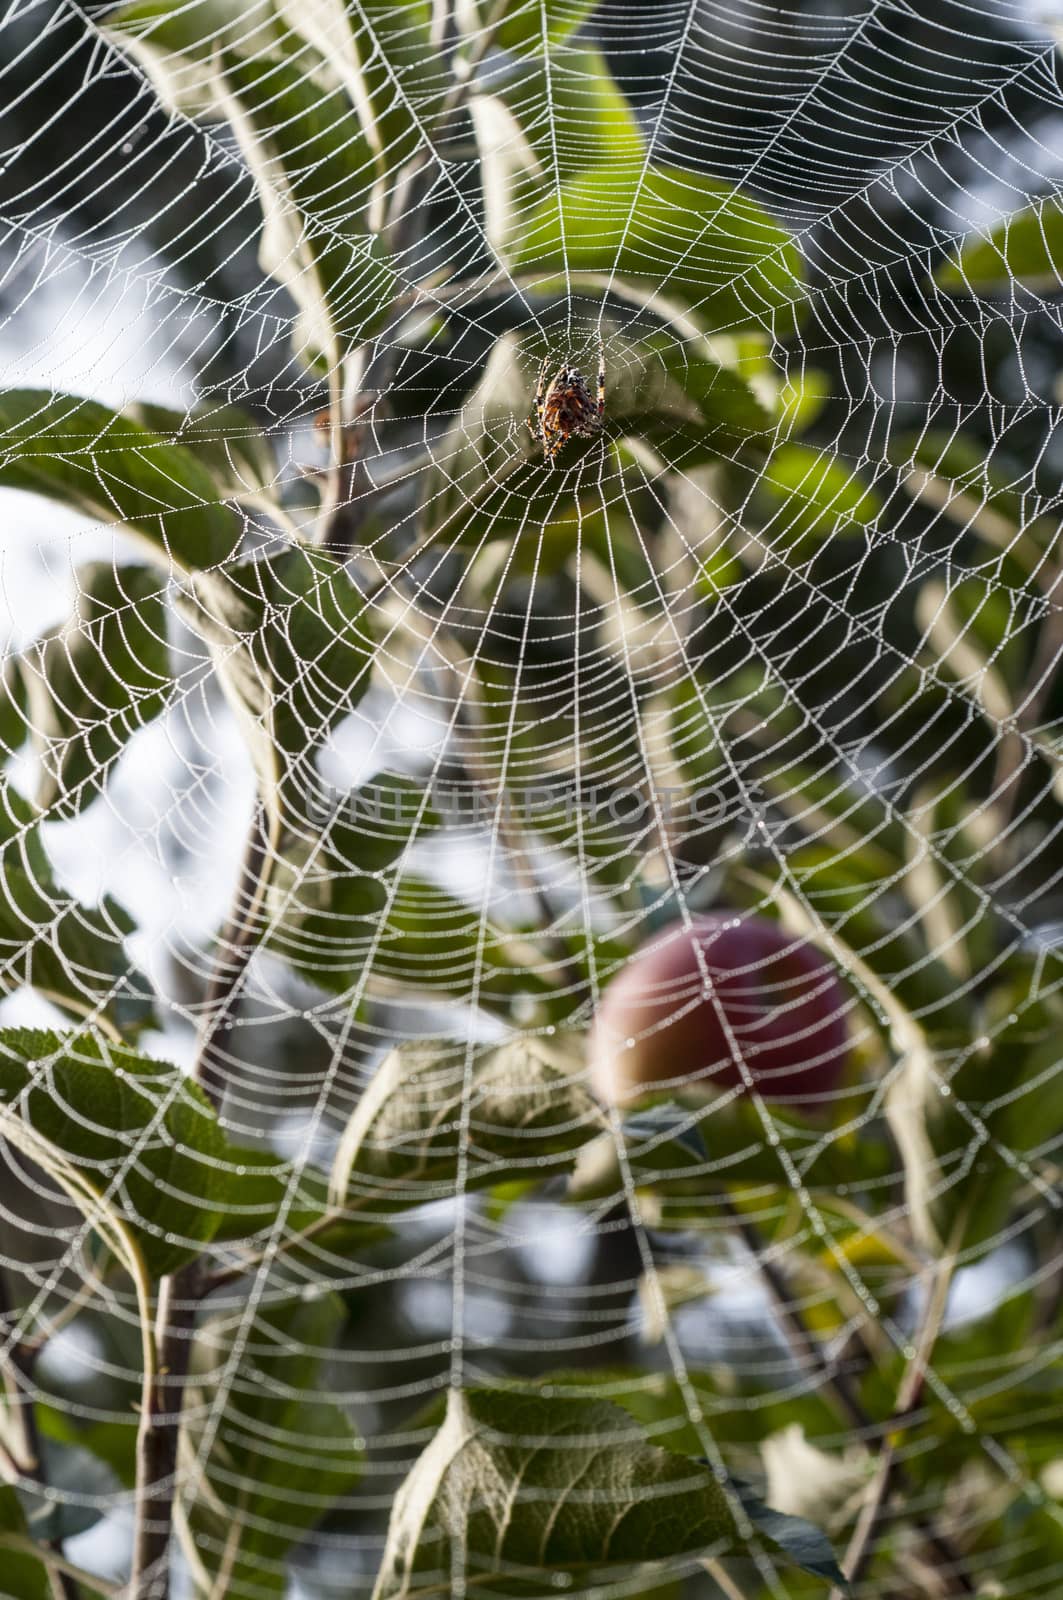 Spider hanging in center of web strung from trees with dew by Njean